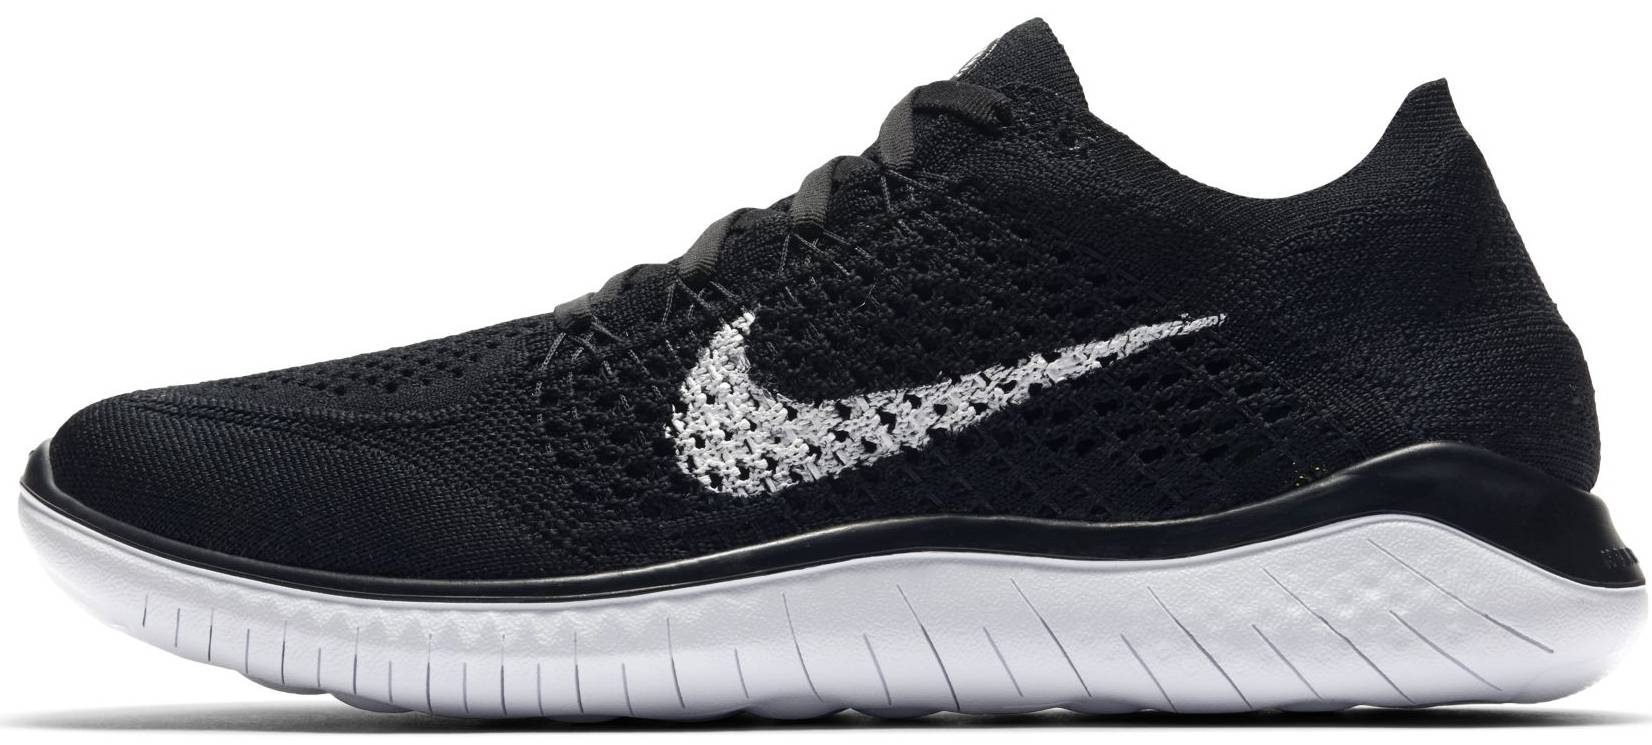 Bachelor beach Empty the trash Nike Free RN Flyknit 2018 Review 2022, Facts, Deals ($75) | RunRepeat